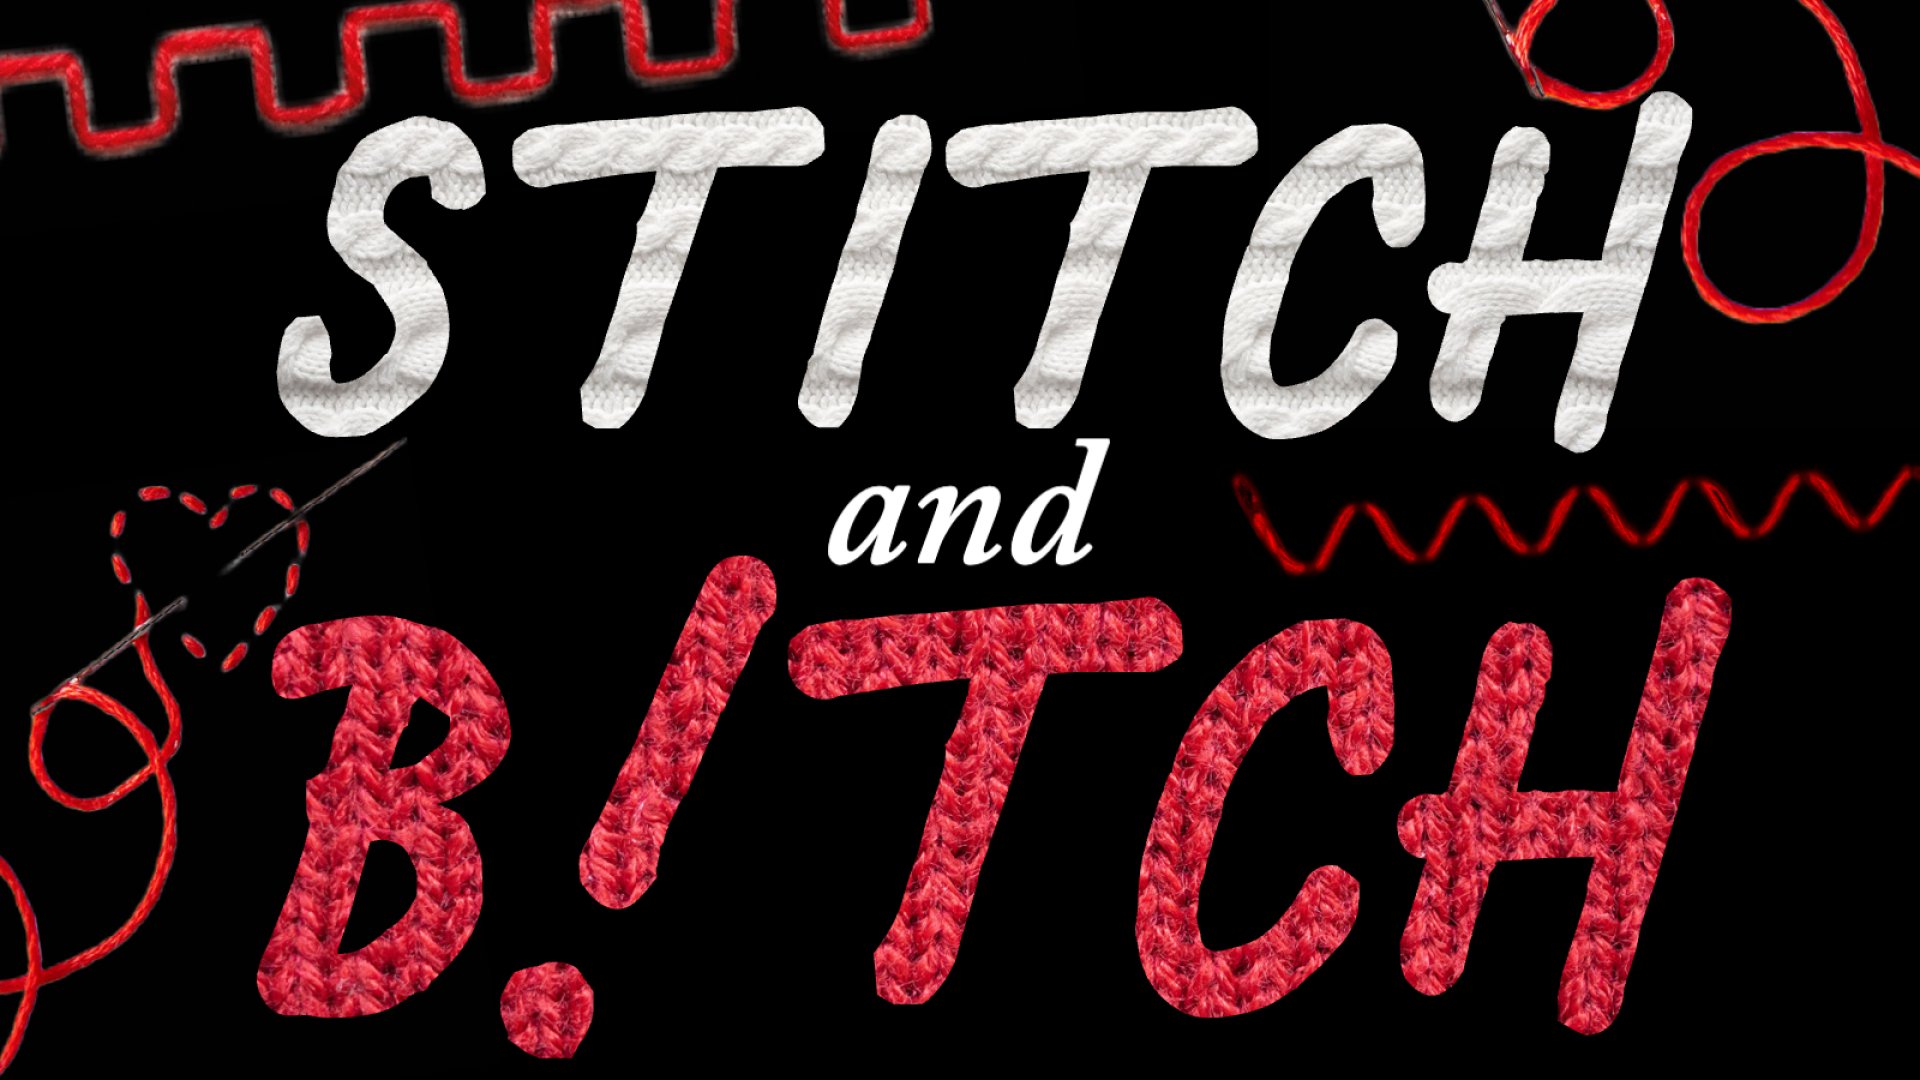 Graphic titled Stitch and Bitch, the text is textured with white and red yarn.